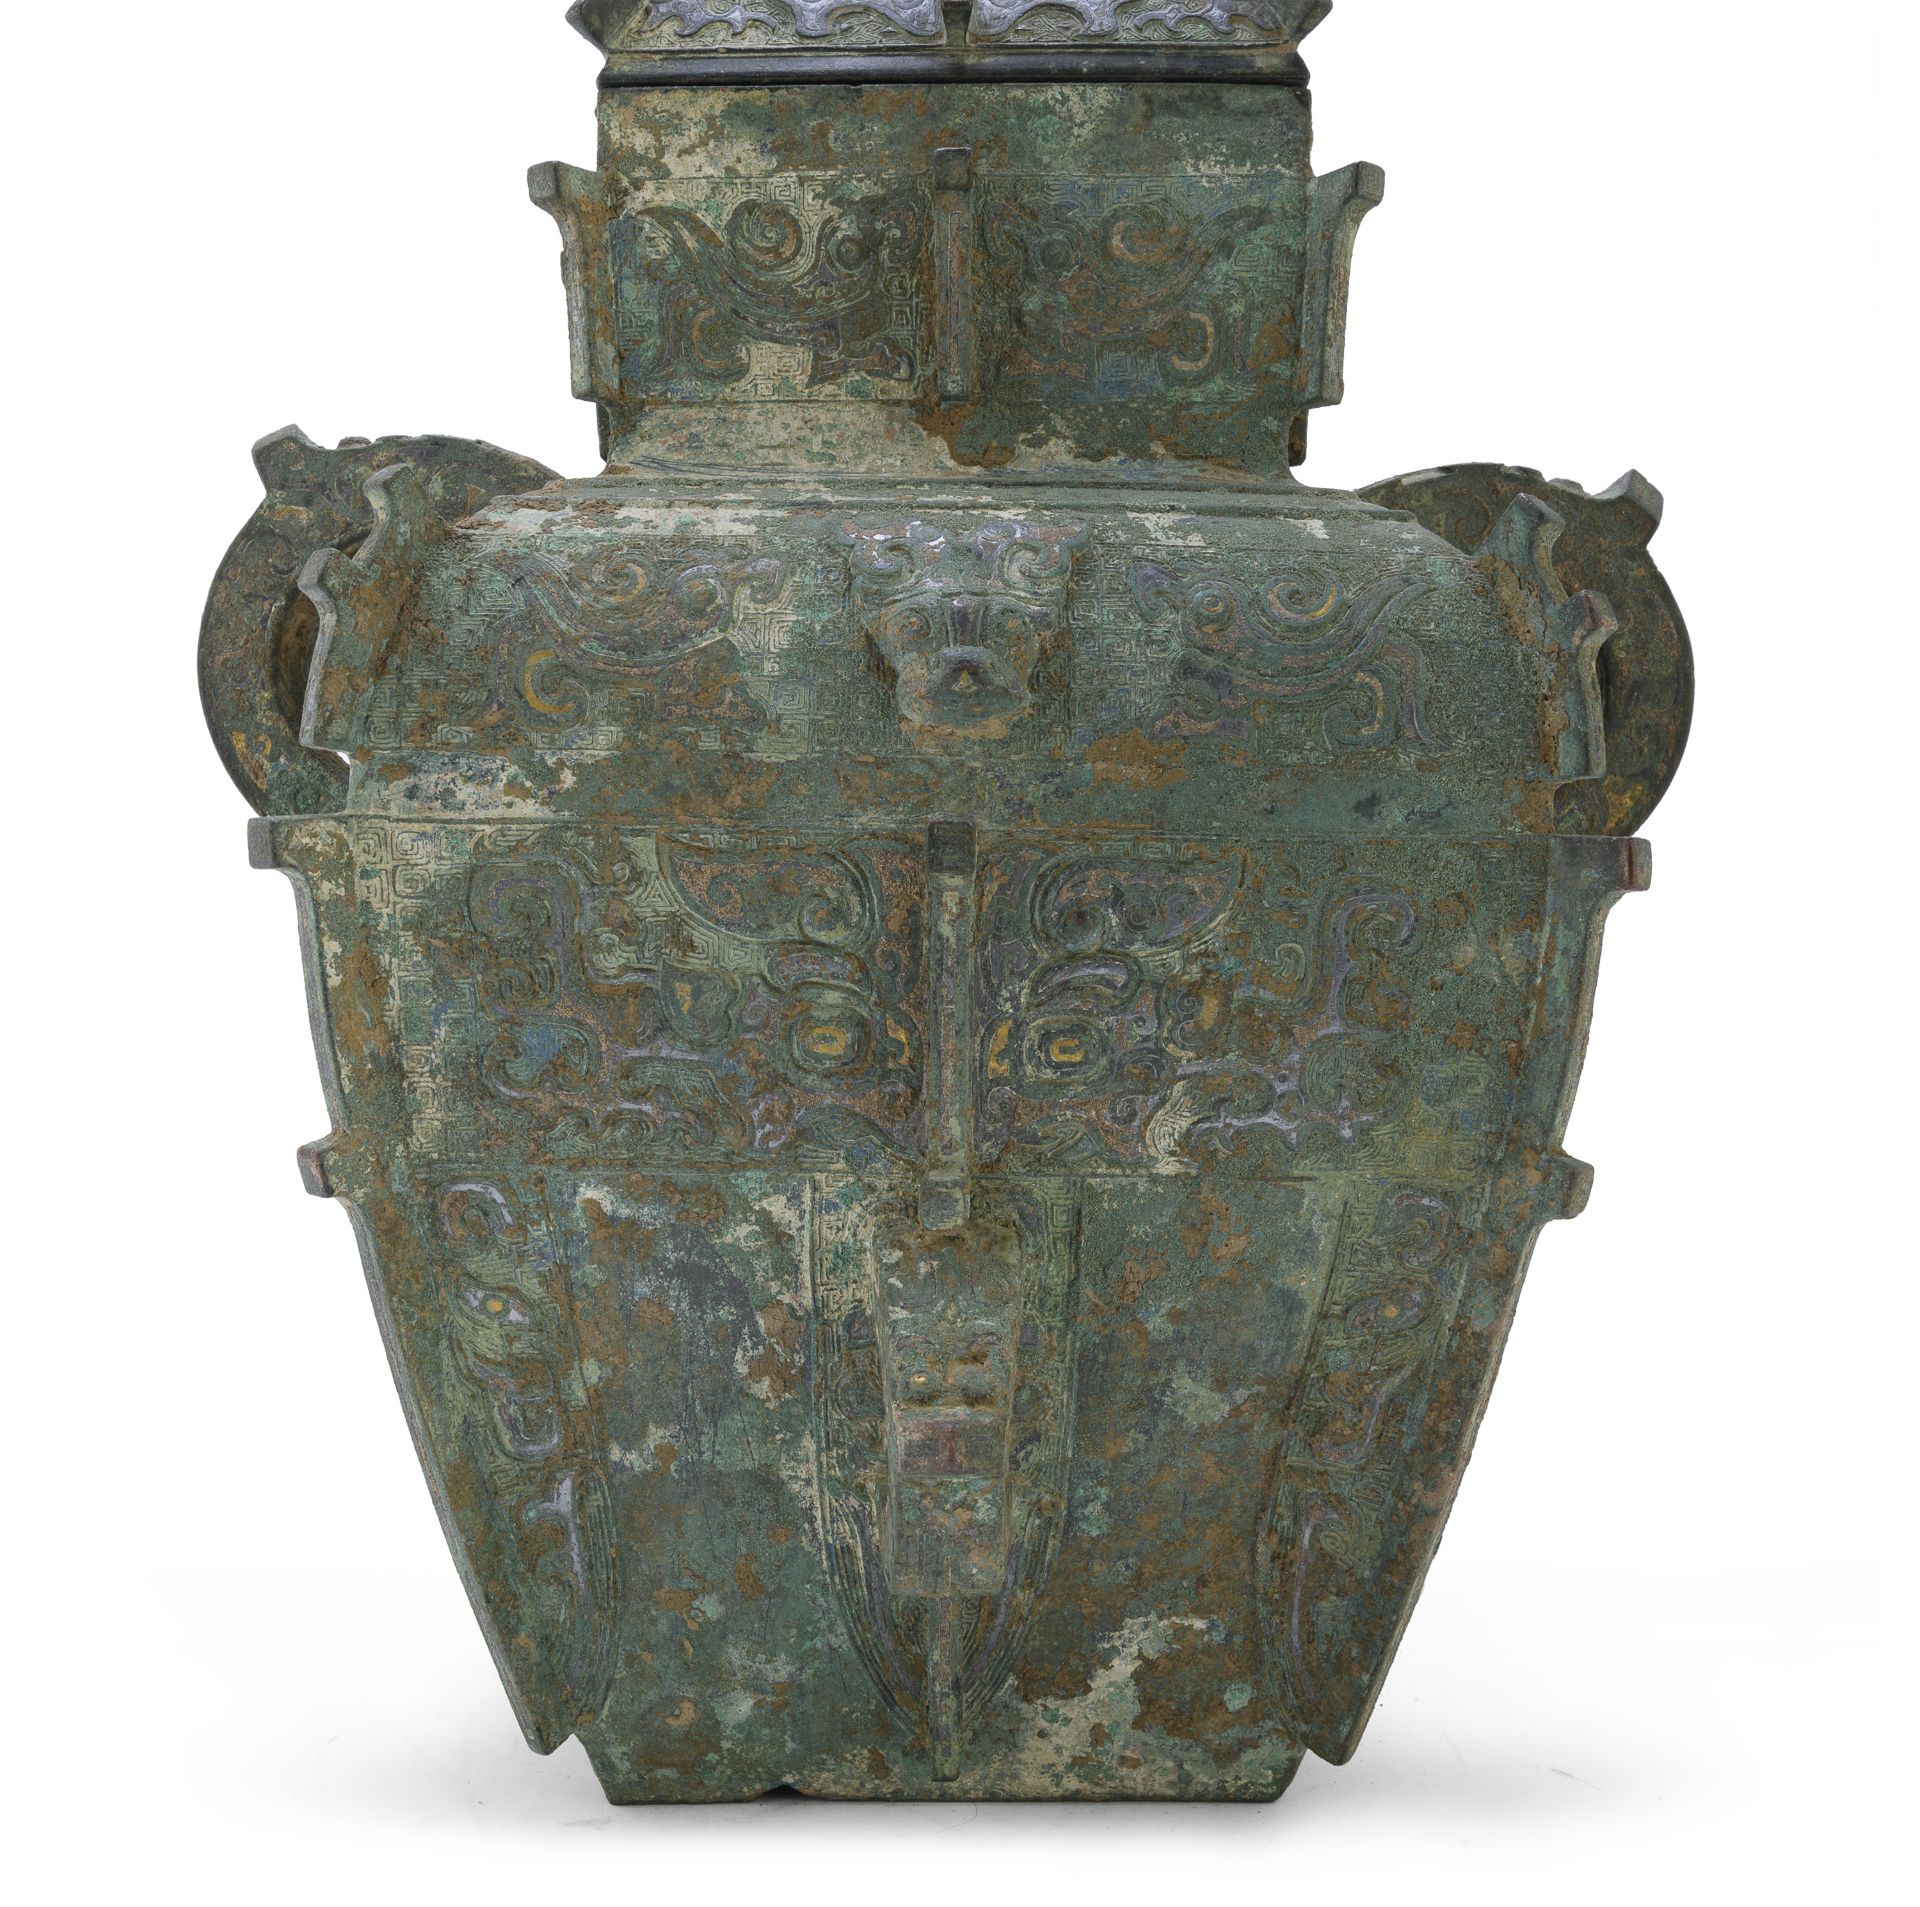 A VERY RARE AND IMPORTANT BRONZE RITUAL WINE VESSEL CHINA 13TH-14TH CENTURY - Image 5 of 7